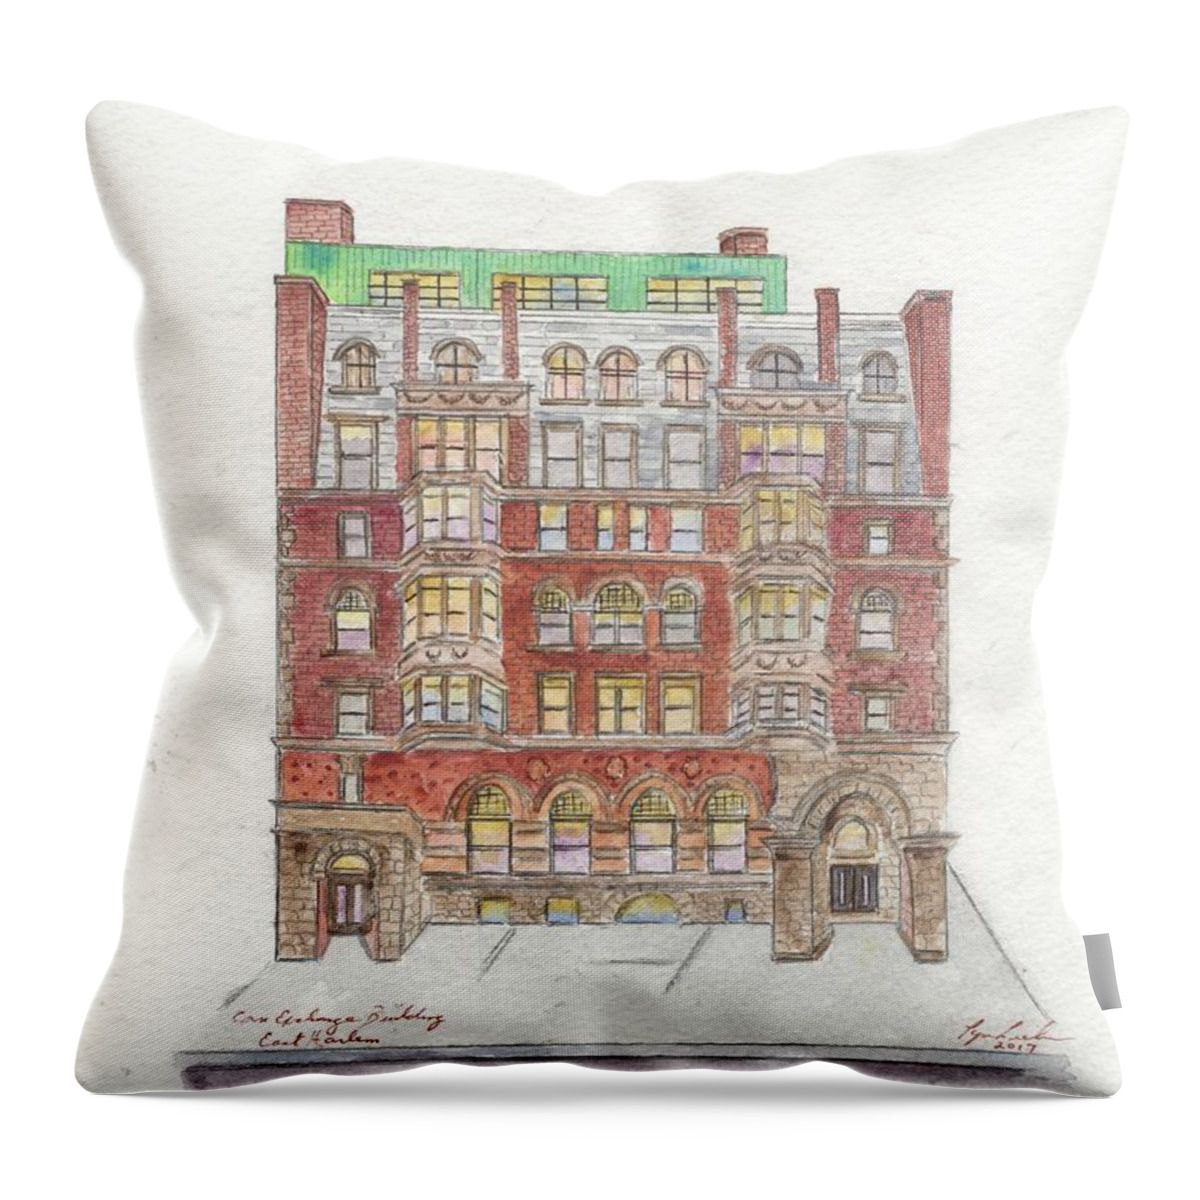 Mount Morris Bank Throw Pillow featuring the painting The Historic Corn Exchange Building in East Harlem by Afinelyne